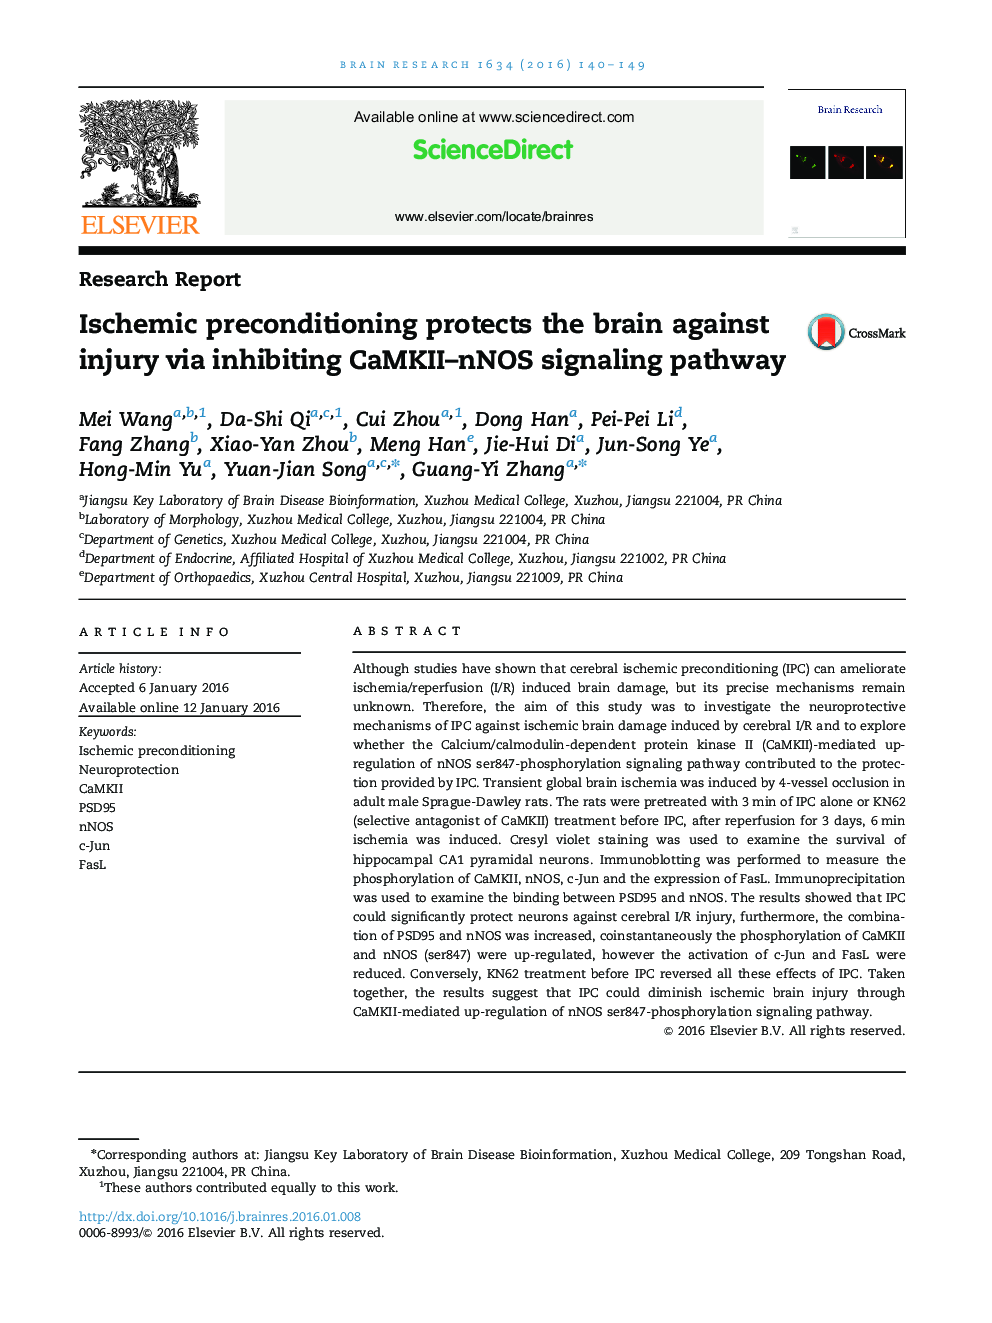 Ischemic preconditioning protects the brain against injury via inhibiting CaMKII–nNOS signaling pathway